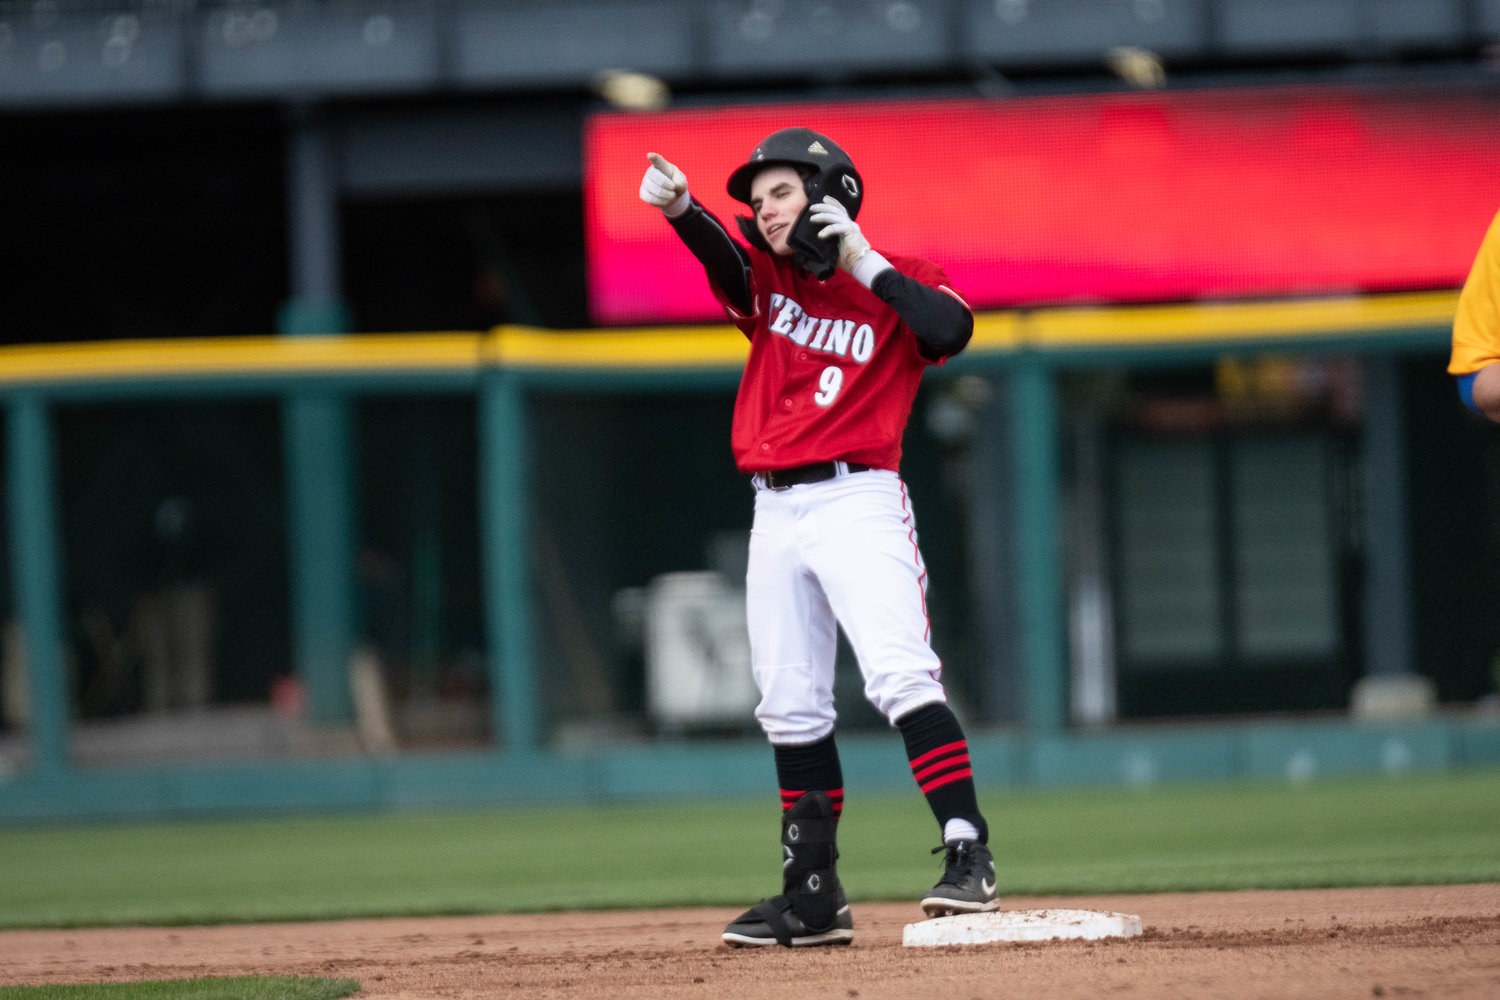 Will Feltus puts in a call from second after hitting a double in the first inning of Tenino's 11-7 loss to Rochester at Cheney Stadium in Tacoma on April 1.